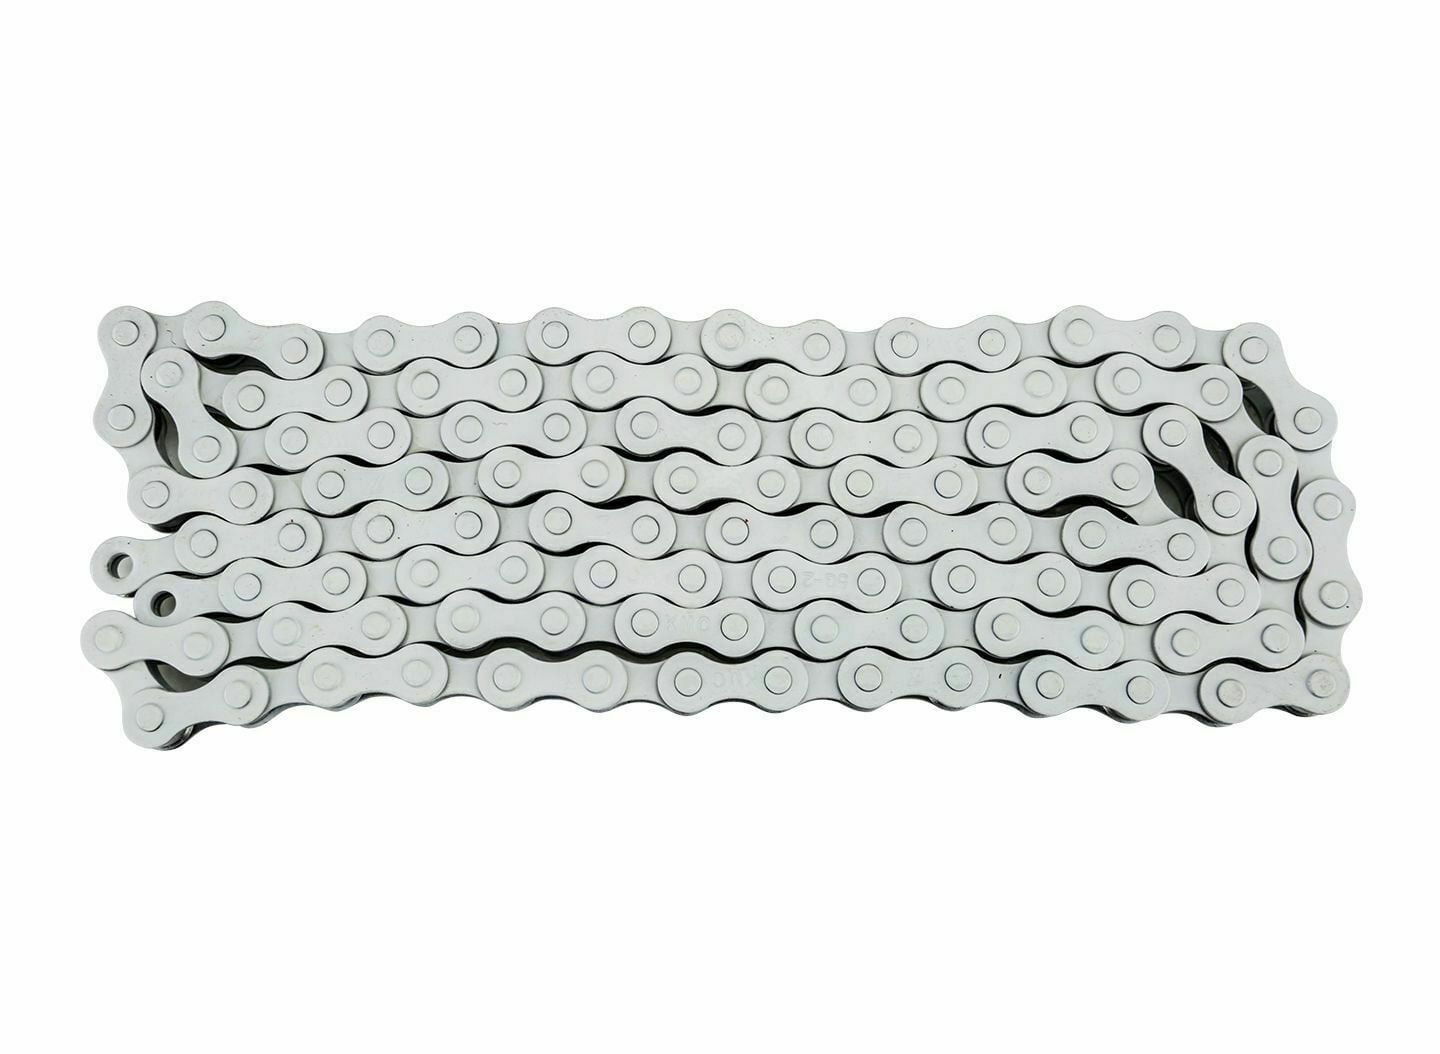 KMC 1/2" x 1/8" BMX Chain Black with Connecting Link NEW 72 Links